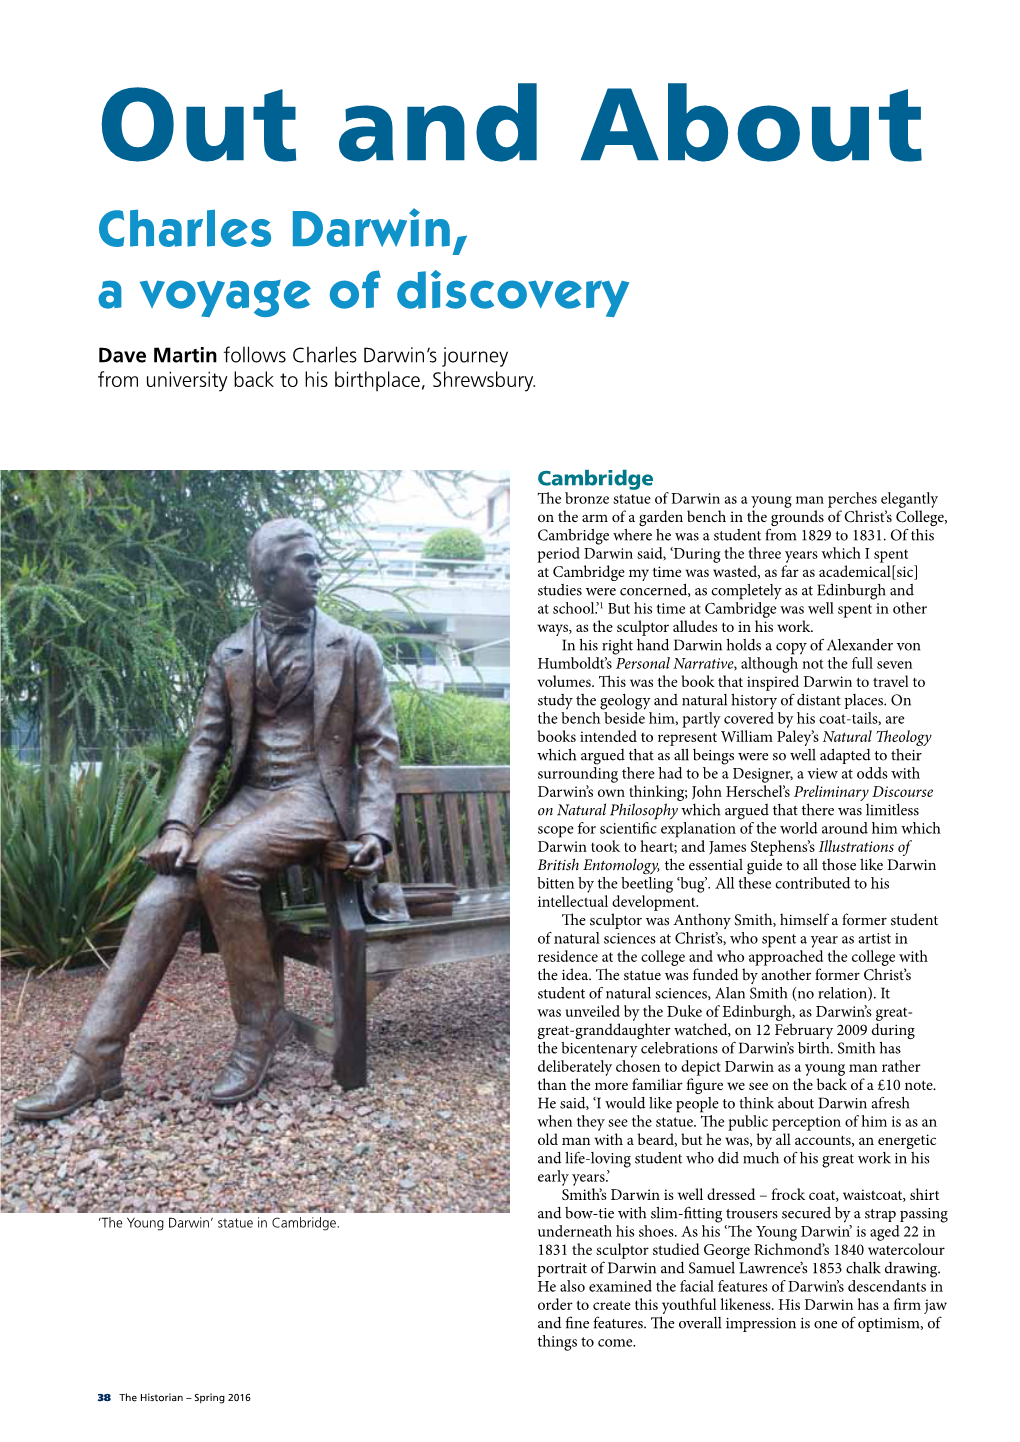 Out and About Charles Darwin, a Voyage of Discovery